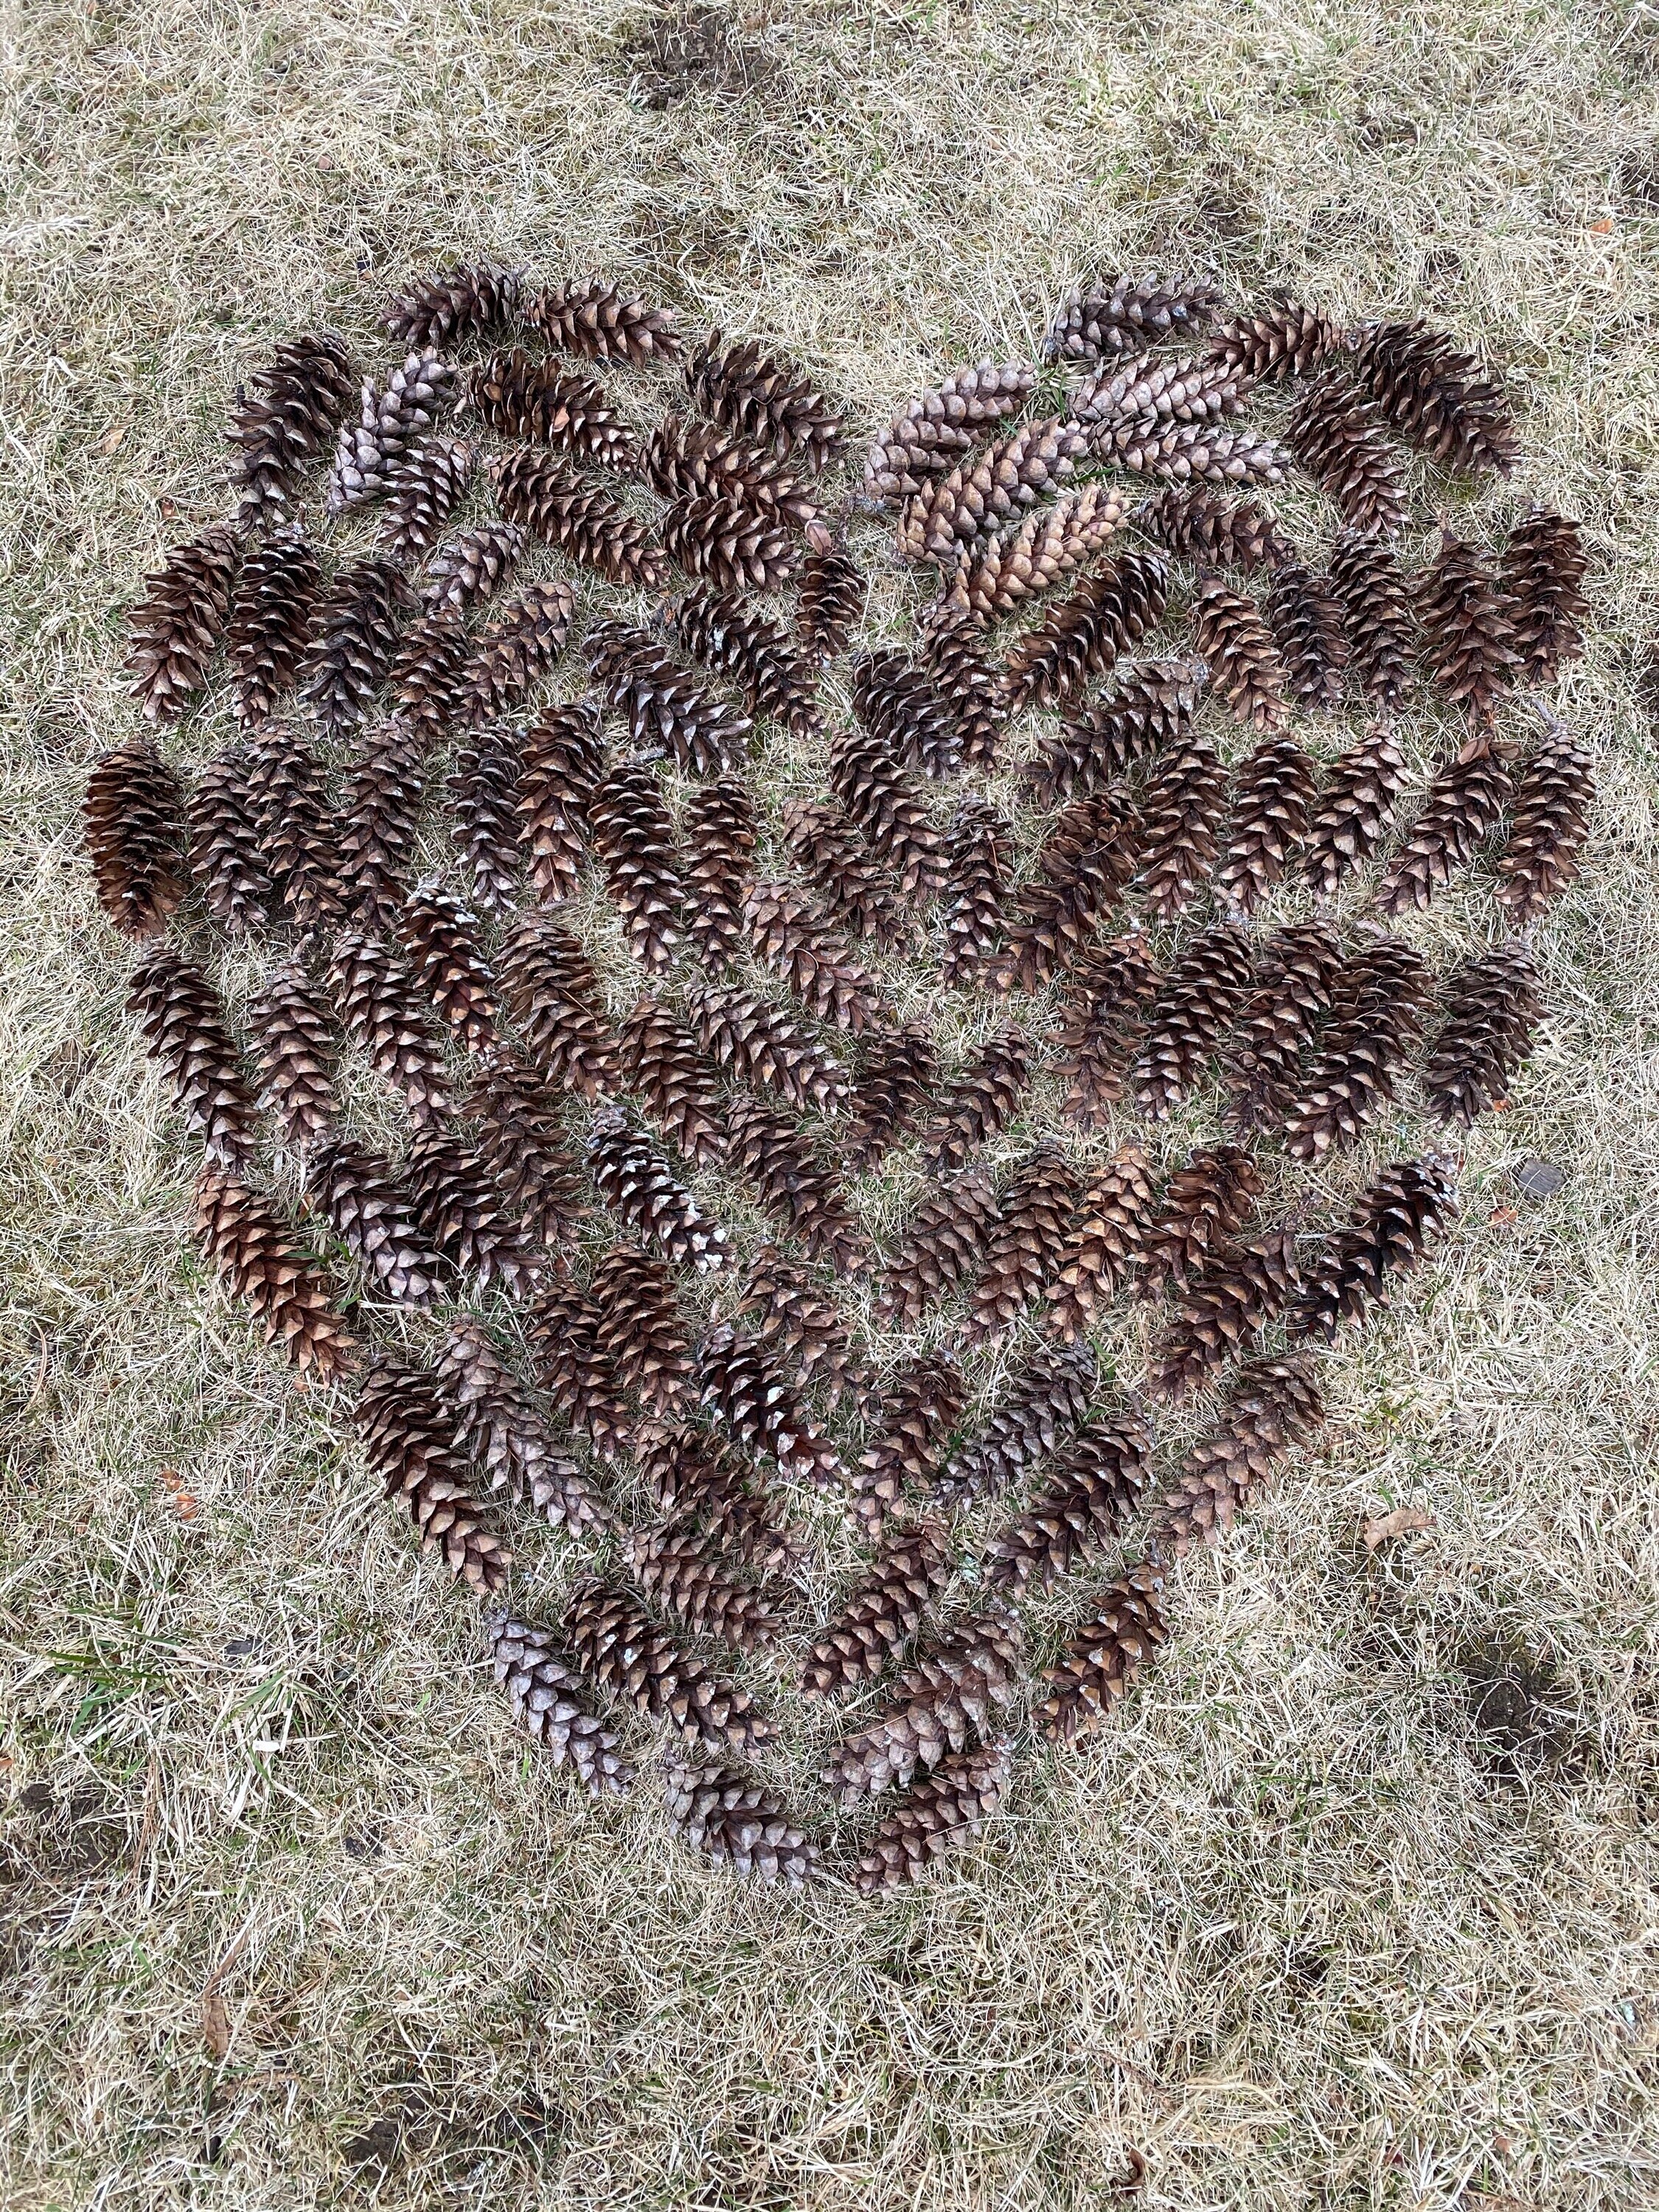 Annie's Pinecone Heart (Full)- Nature Notes.jpeg